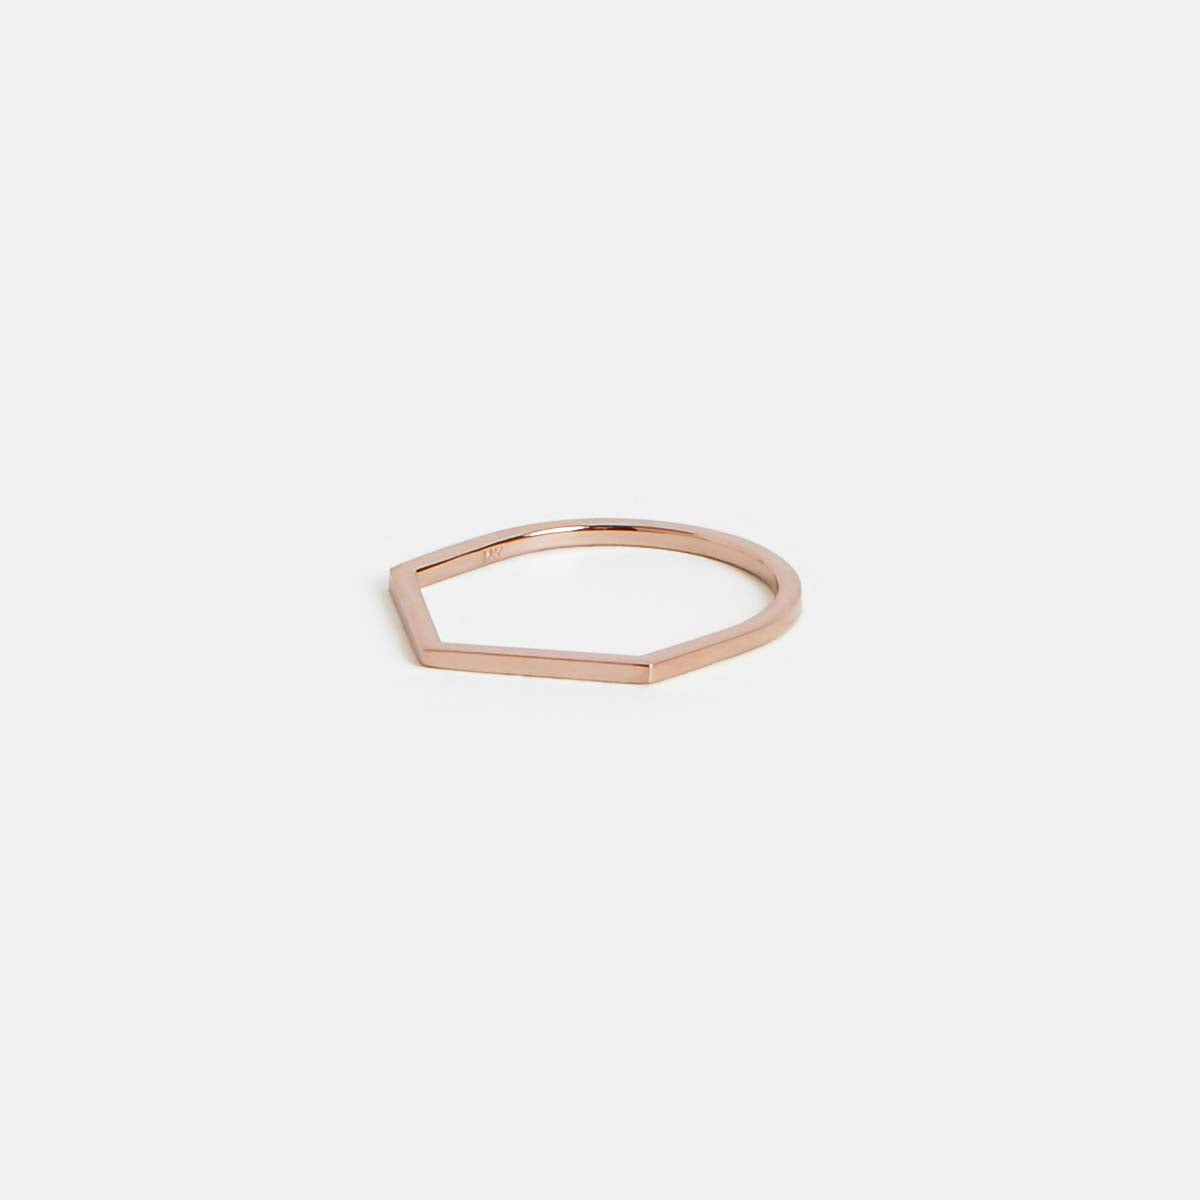 Namas Unusual Ring in 14k Rose Gold by SHW Fine Jewelry NYC